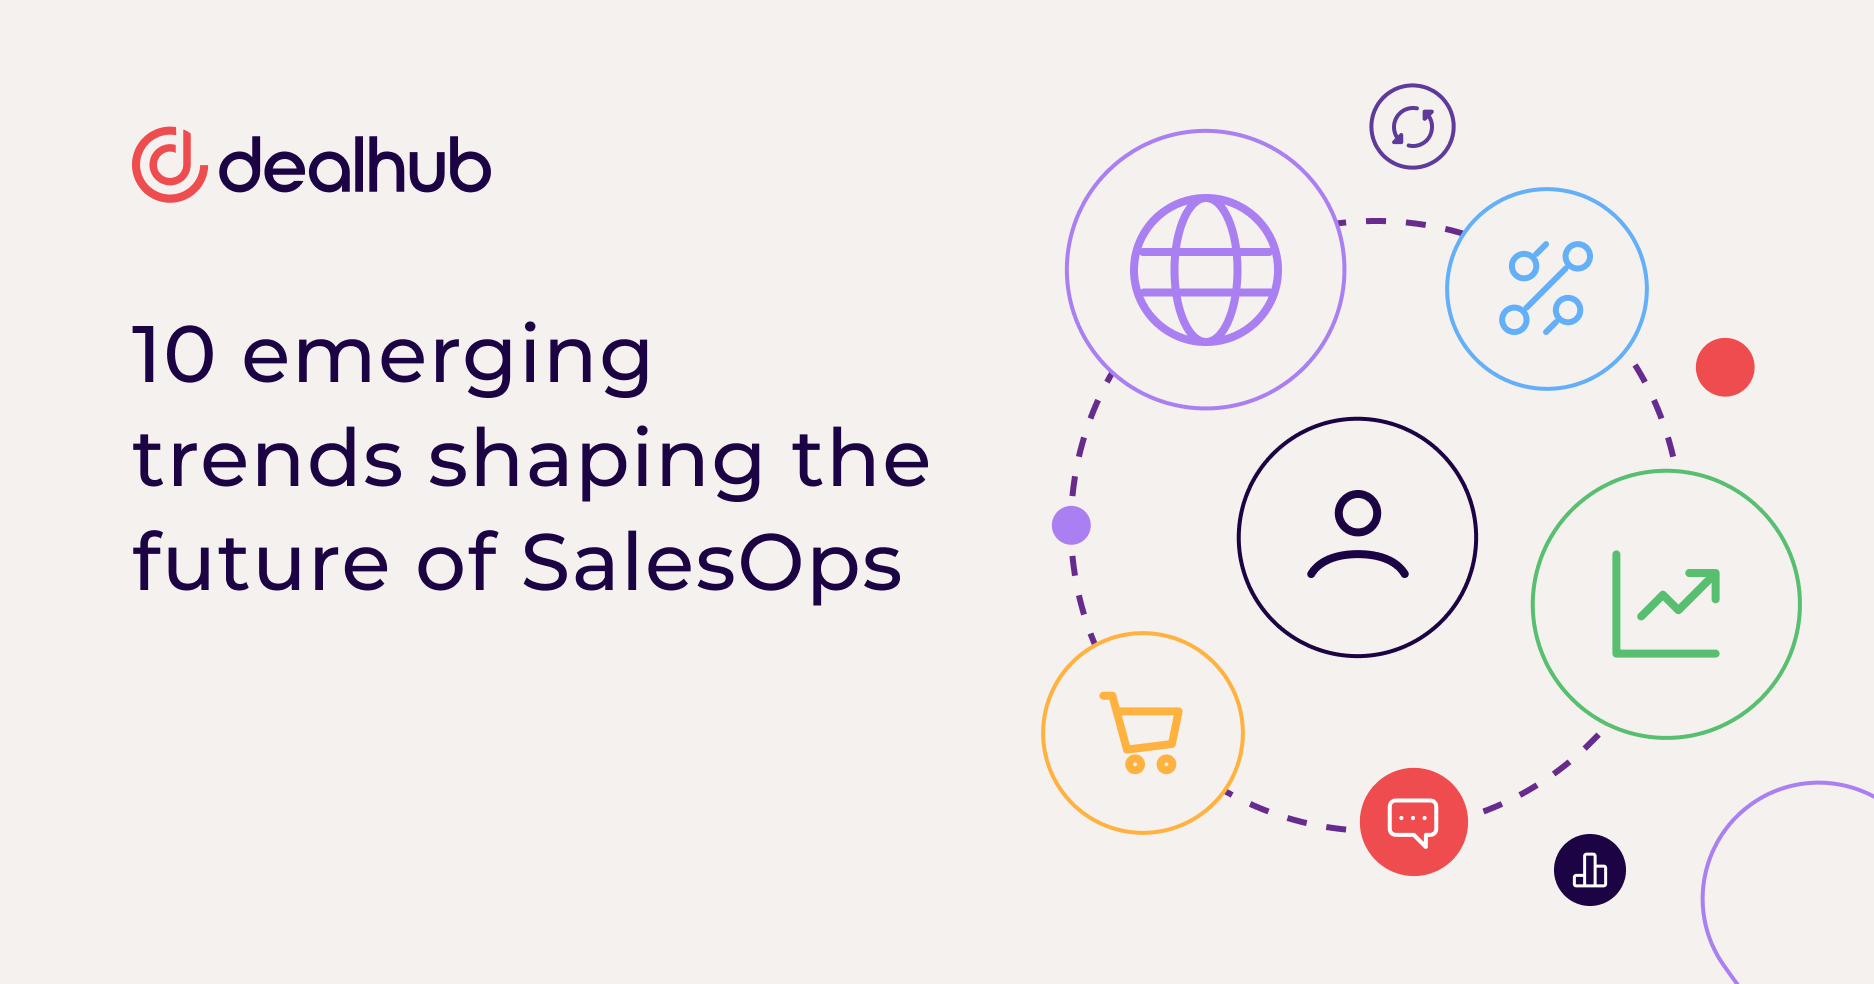 10 emerging trends shaping the future of SalesOps